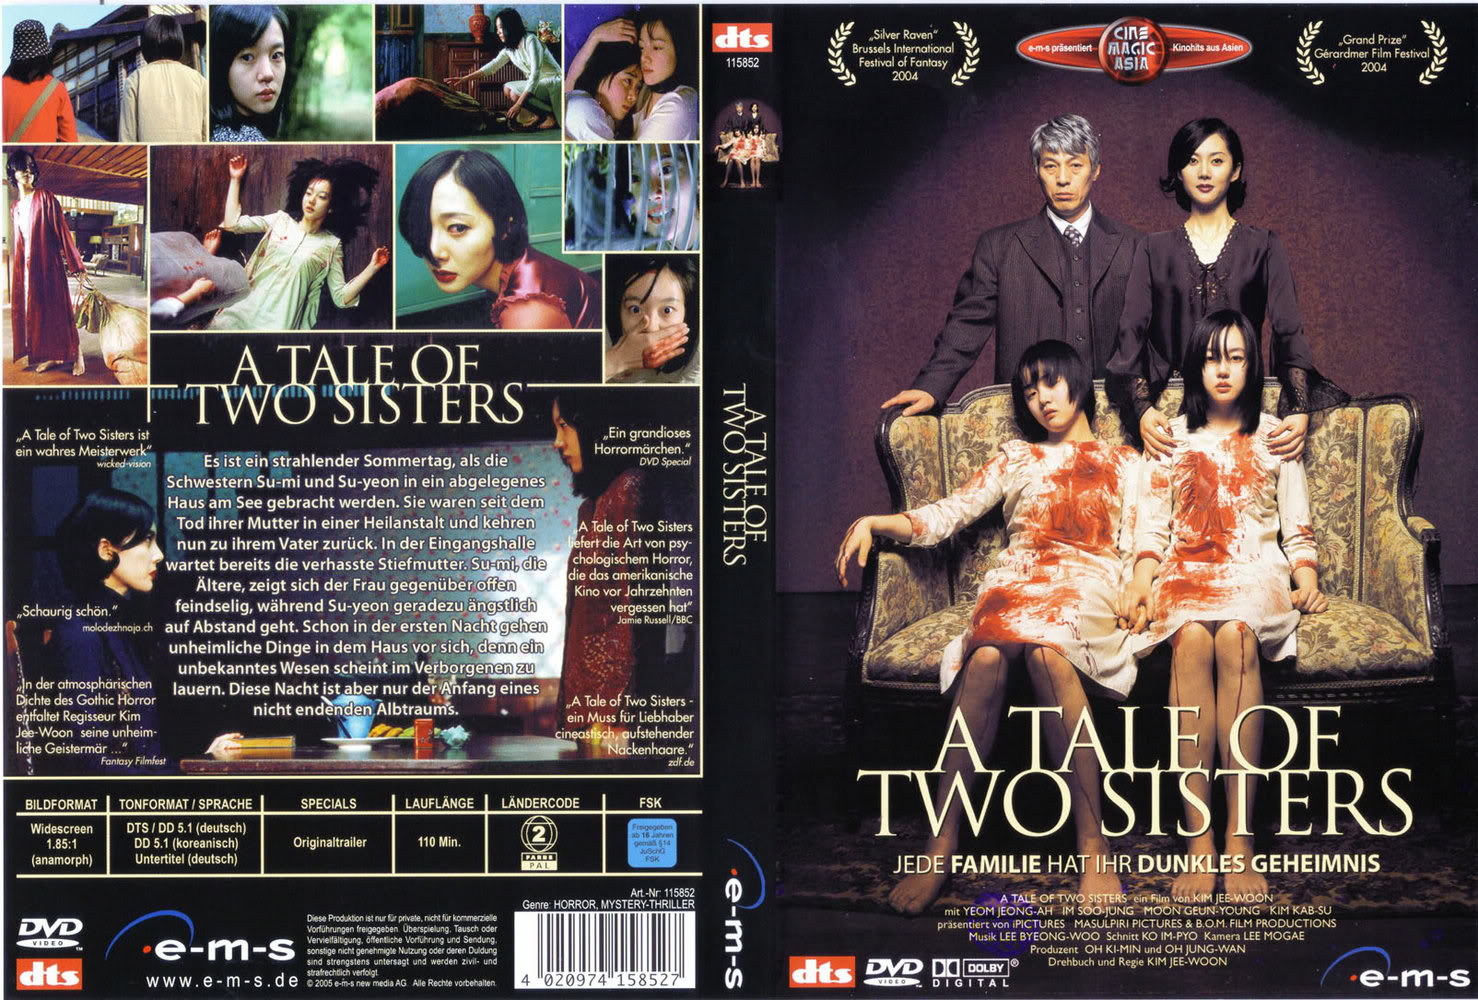 A tale of two песня. Tale of two sisters Постер. "A Tale of two sisters" (South Korea, 2003). Chantelise – a Tale of two sisters. Twin Quest -the Tale of two sisters-.